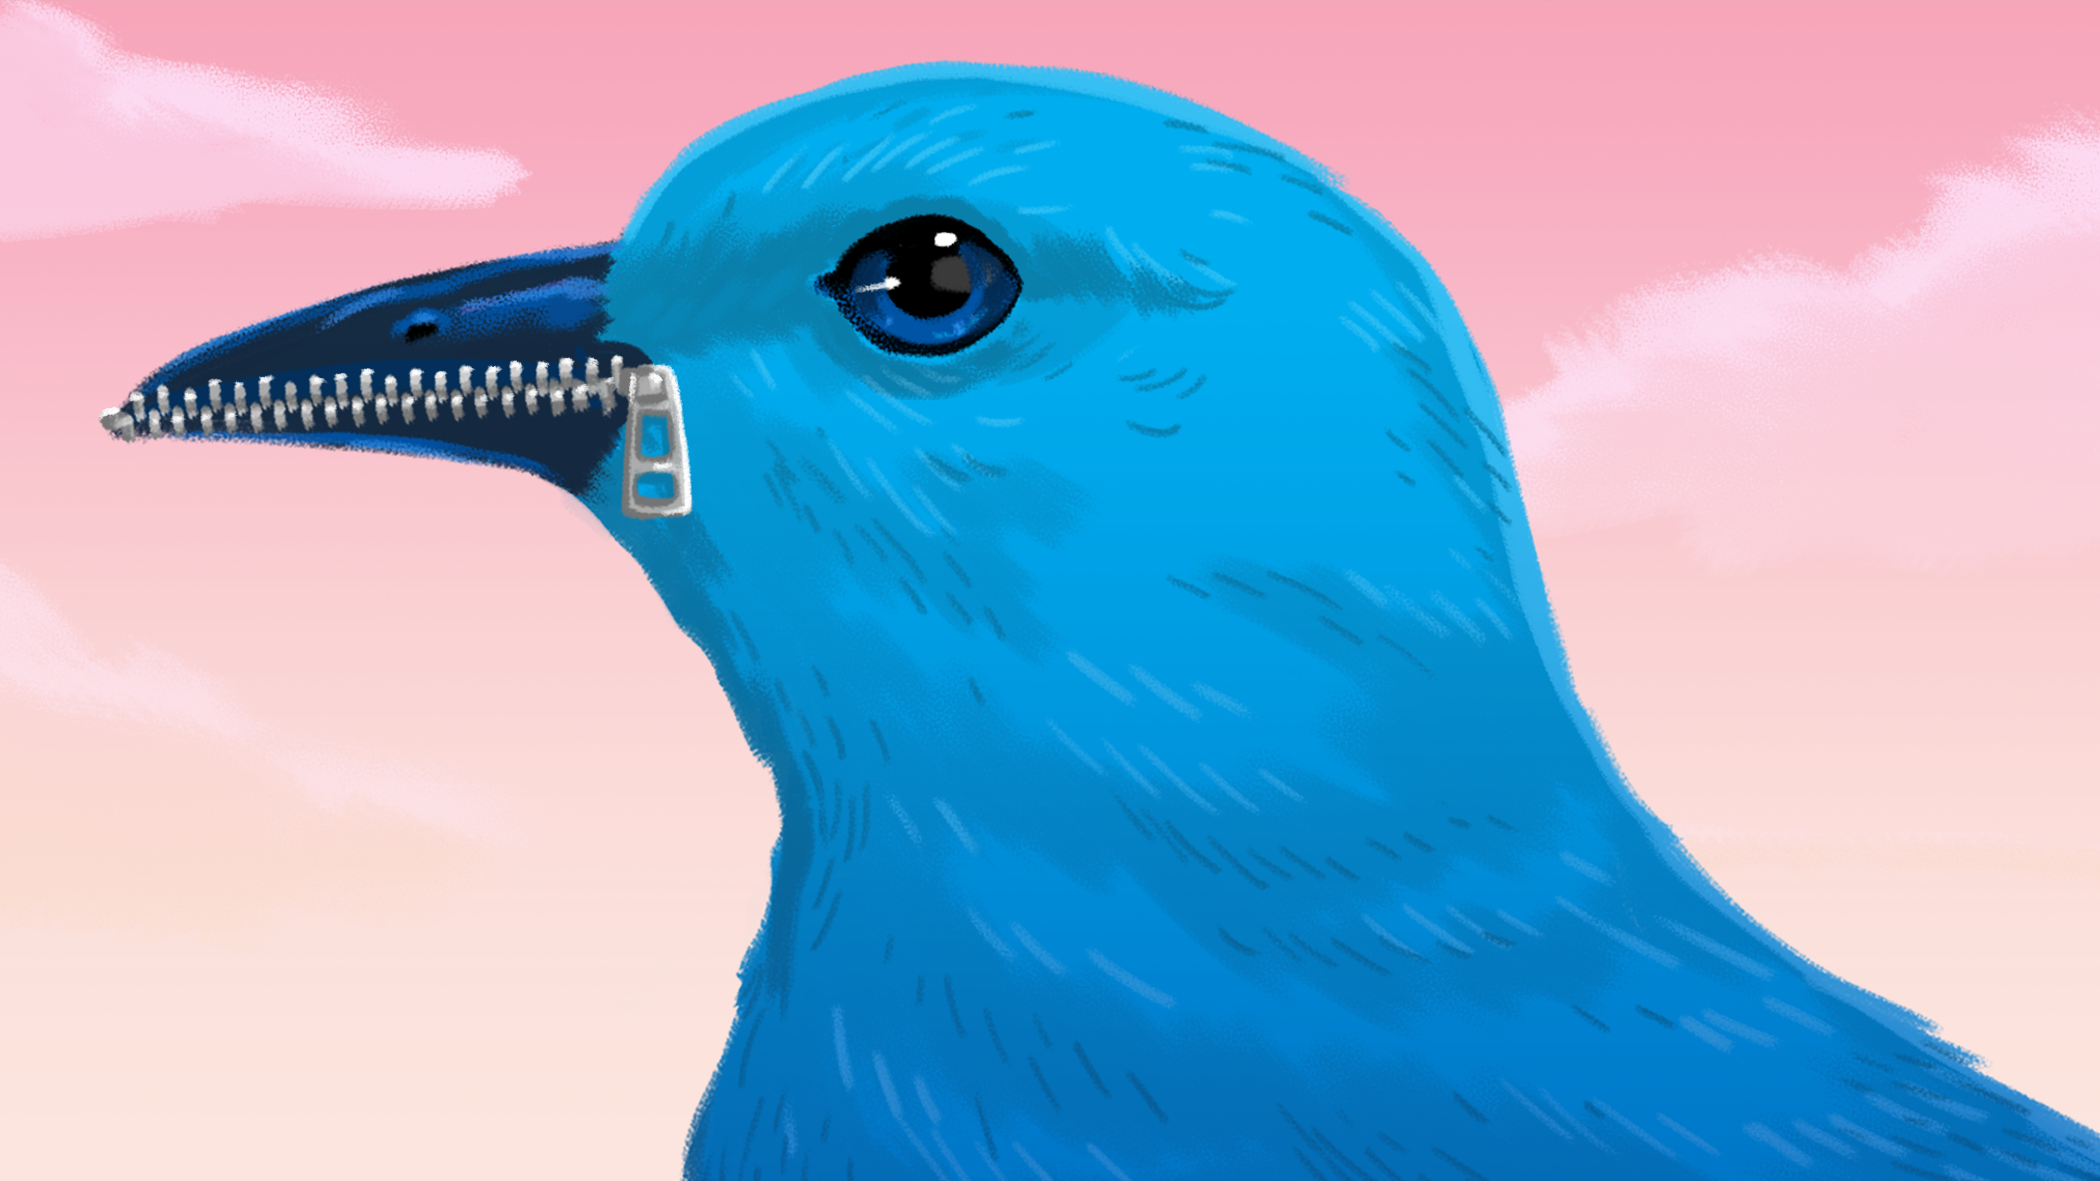 Blue bird with zipper for a mouth